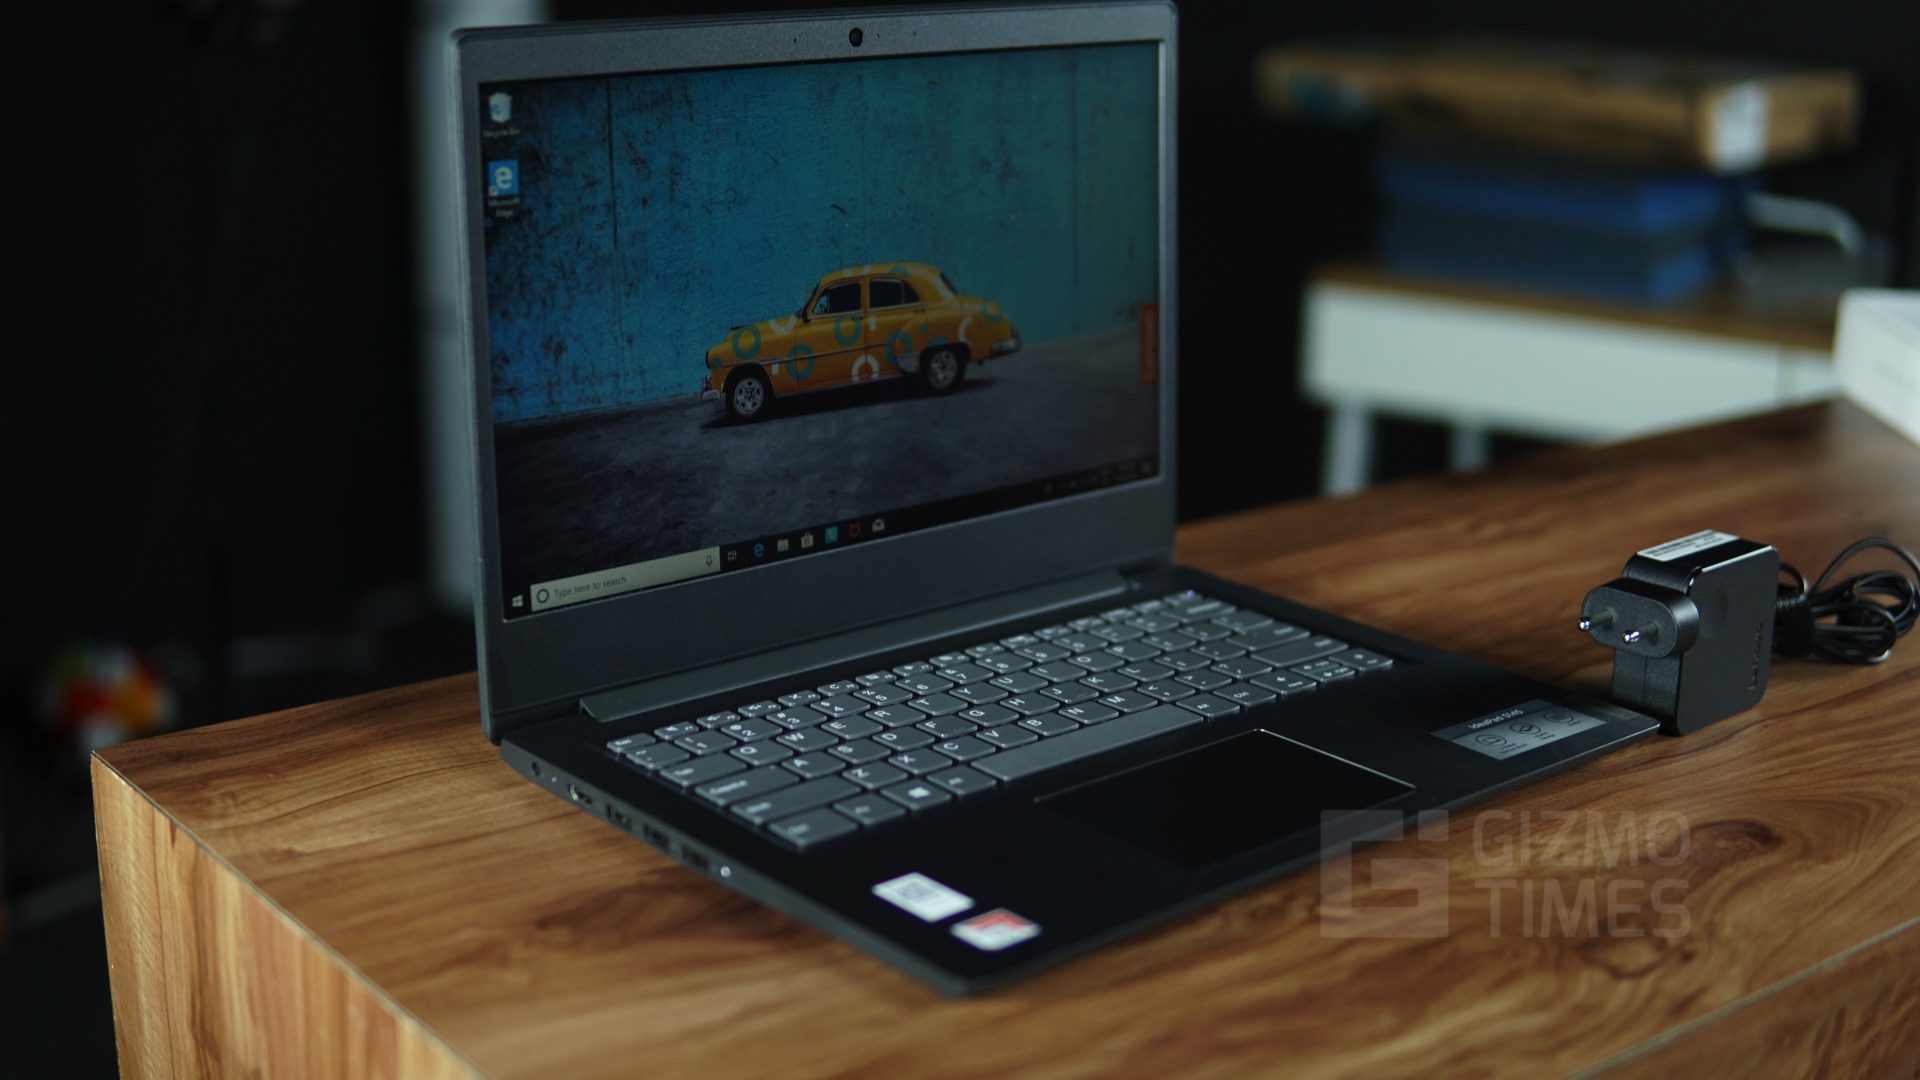 Lenovo Ideapad S145 Review A Budget Laptop For The Millennials